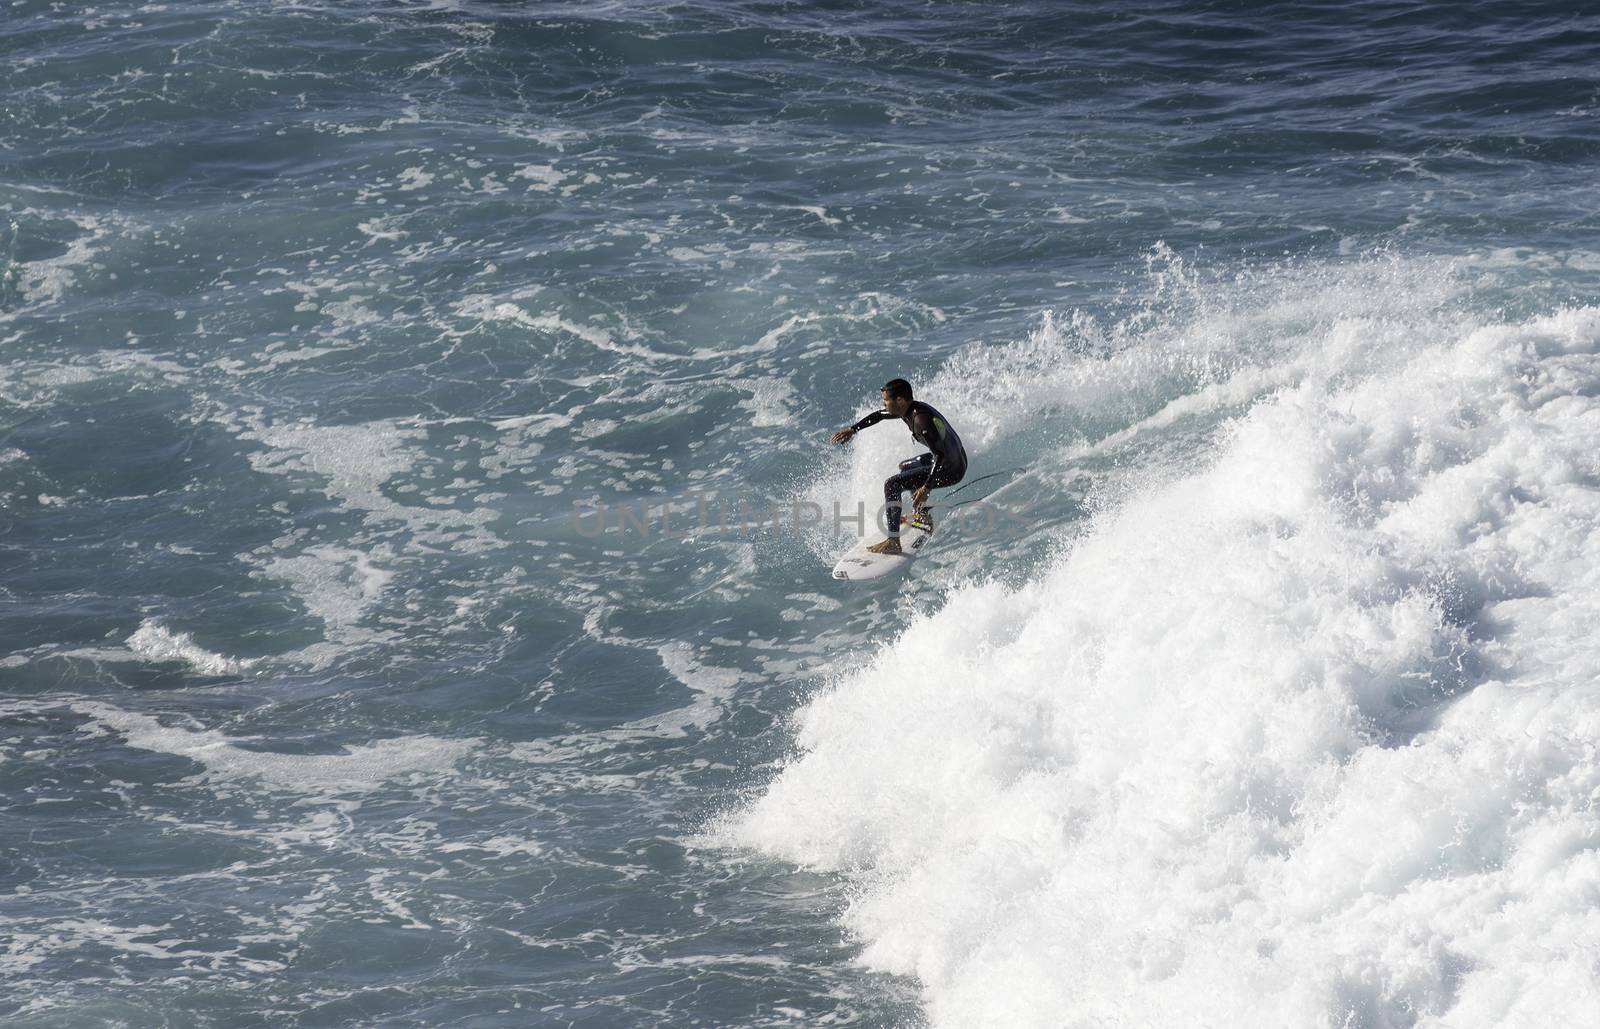 SAO VINCENTE,PORTUGAL-MARCH 24 Unidentified boy surfing on the big waves at the north coast of Madeira on MArch 23,2016 in Sao Vincente,Sao Vincente had the biggest waves at the portugal coast